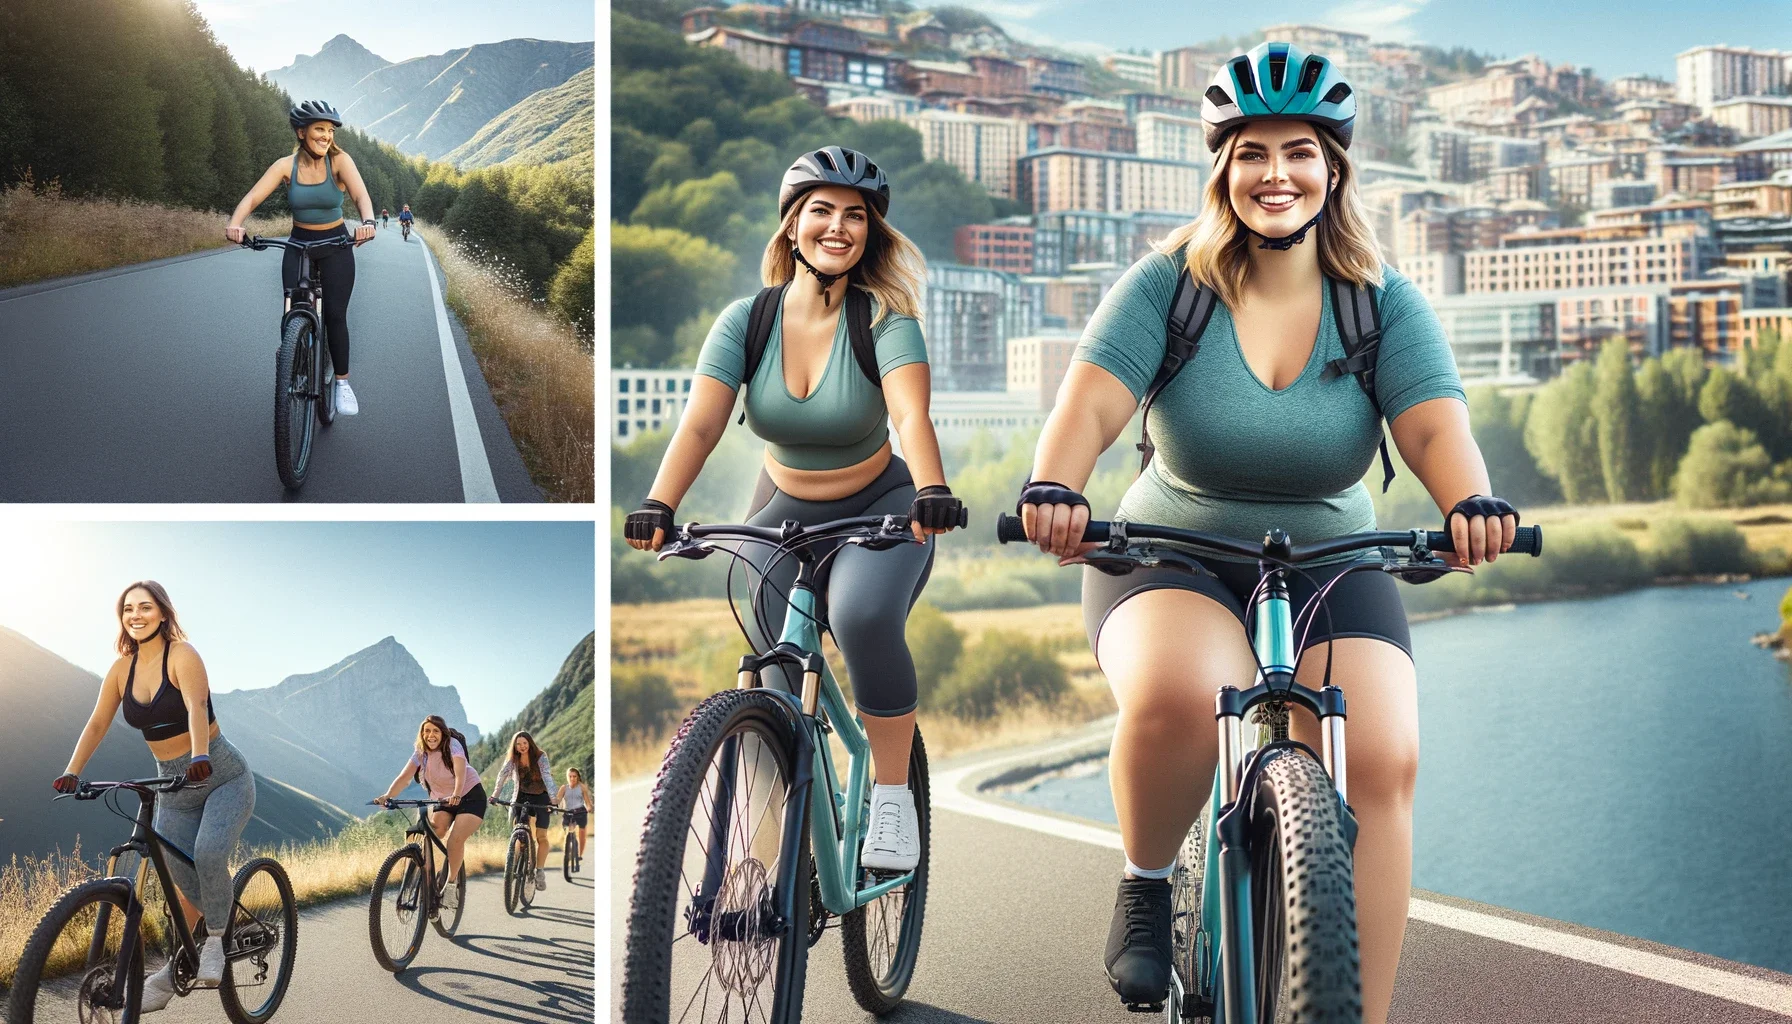 A confident, smiling plus-size female cyclist wearing a helmet and cycling gear, riding a sturdy hybrid bike along a scenic city path.